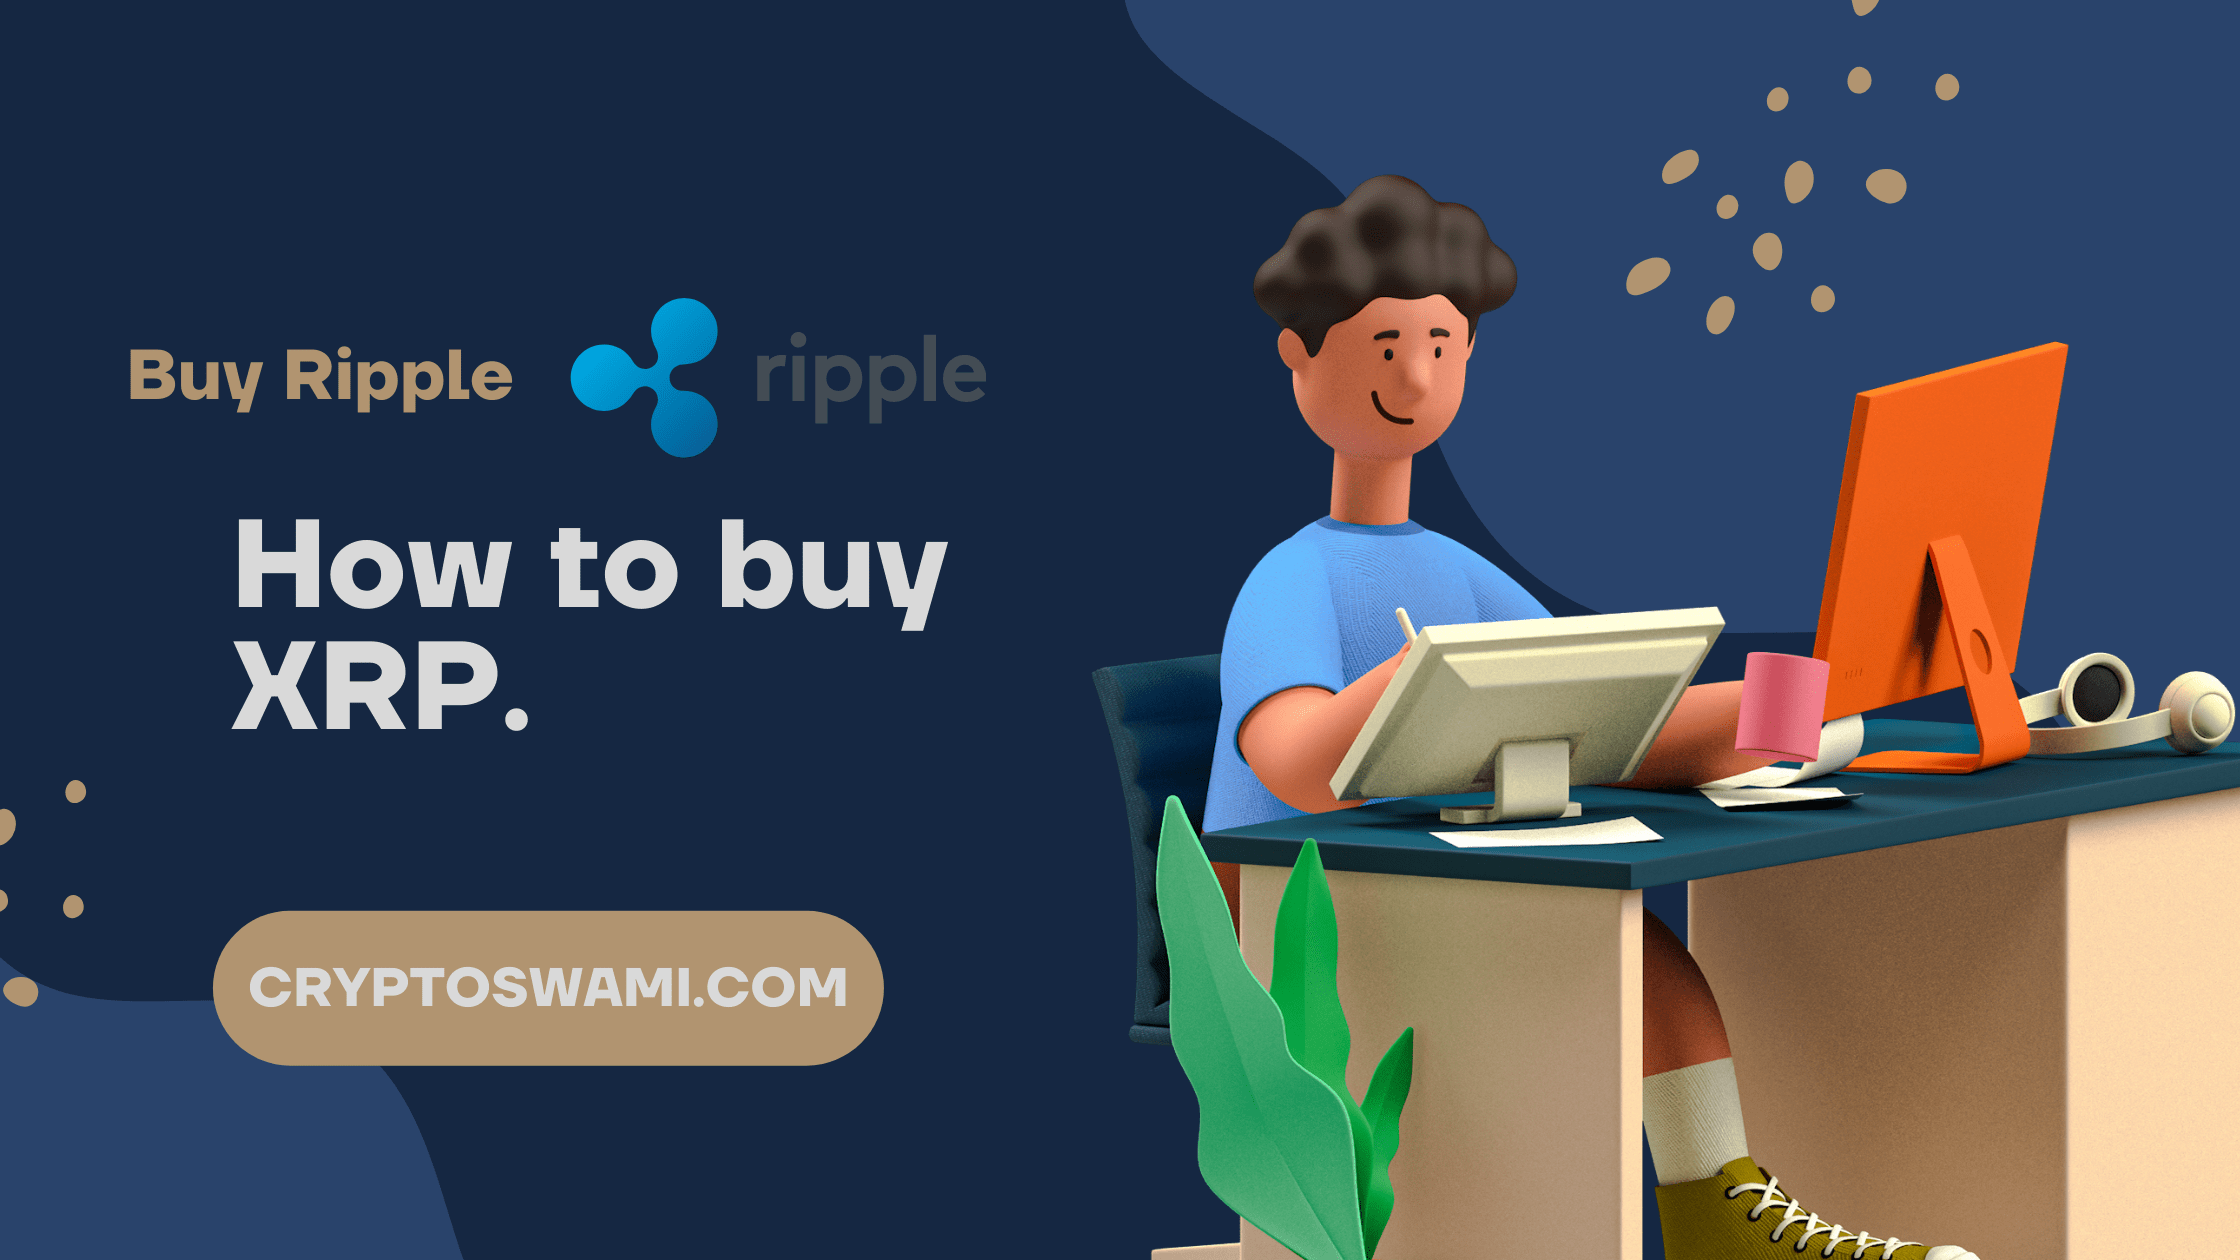 Buy Ripple: How to buy XRP Like a Pro